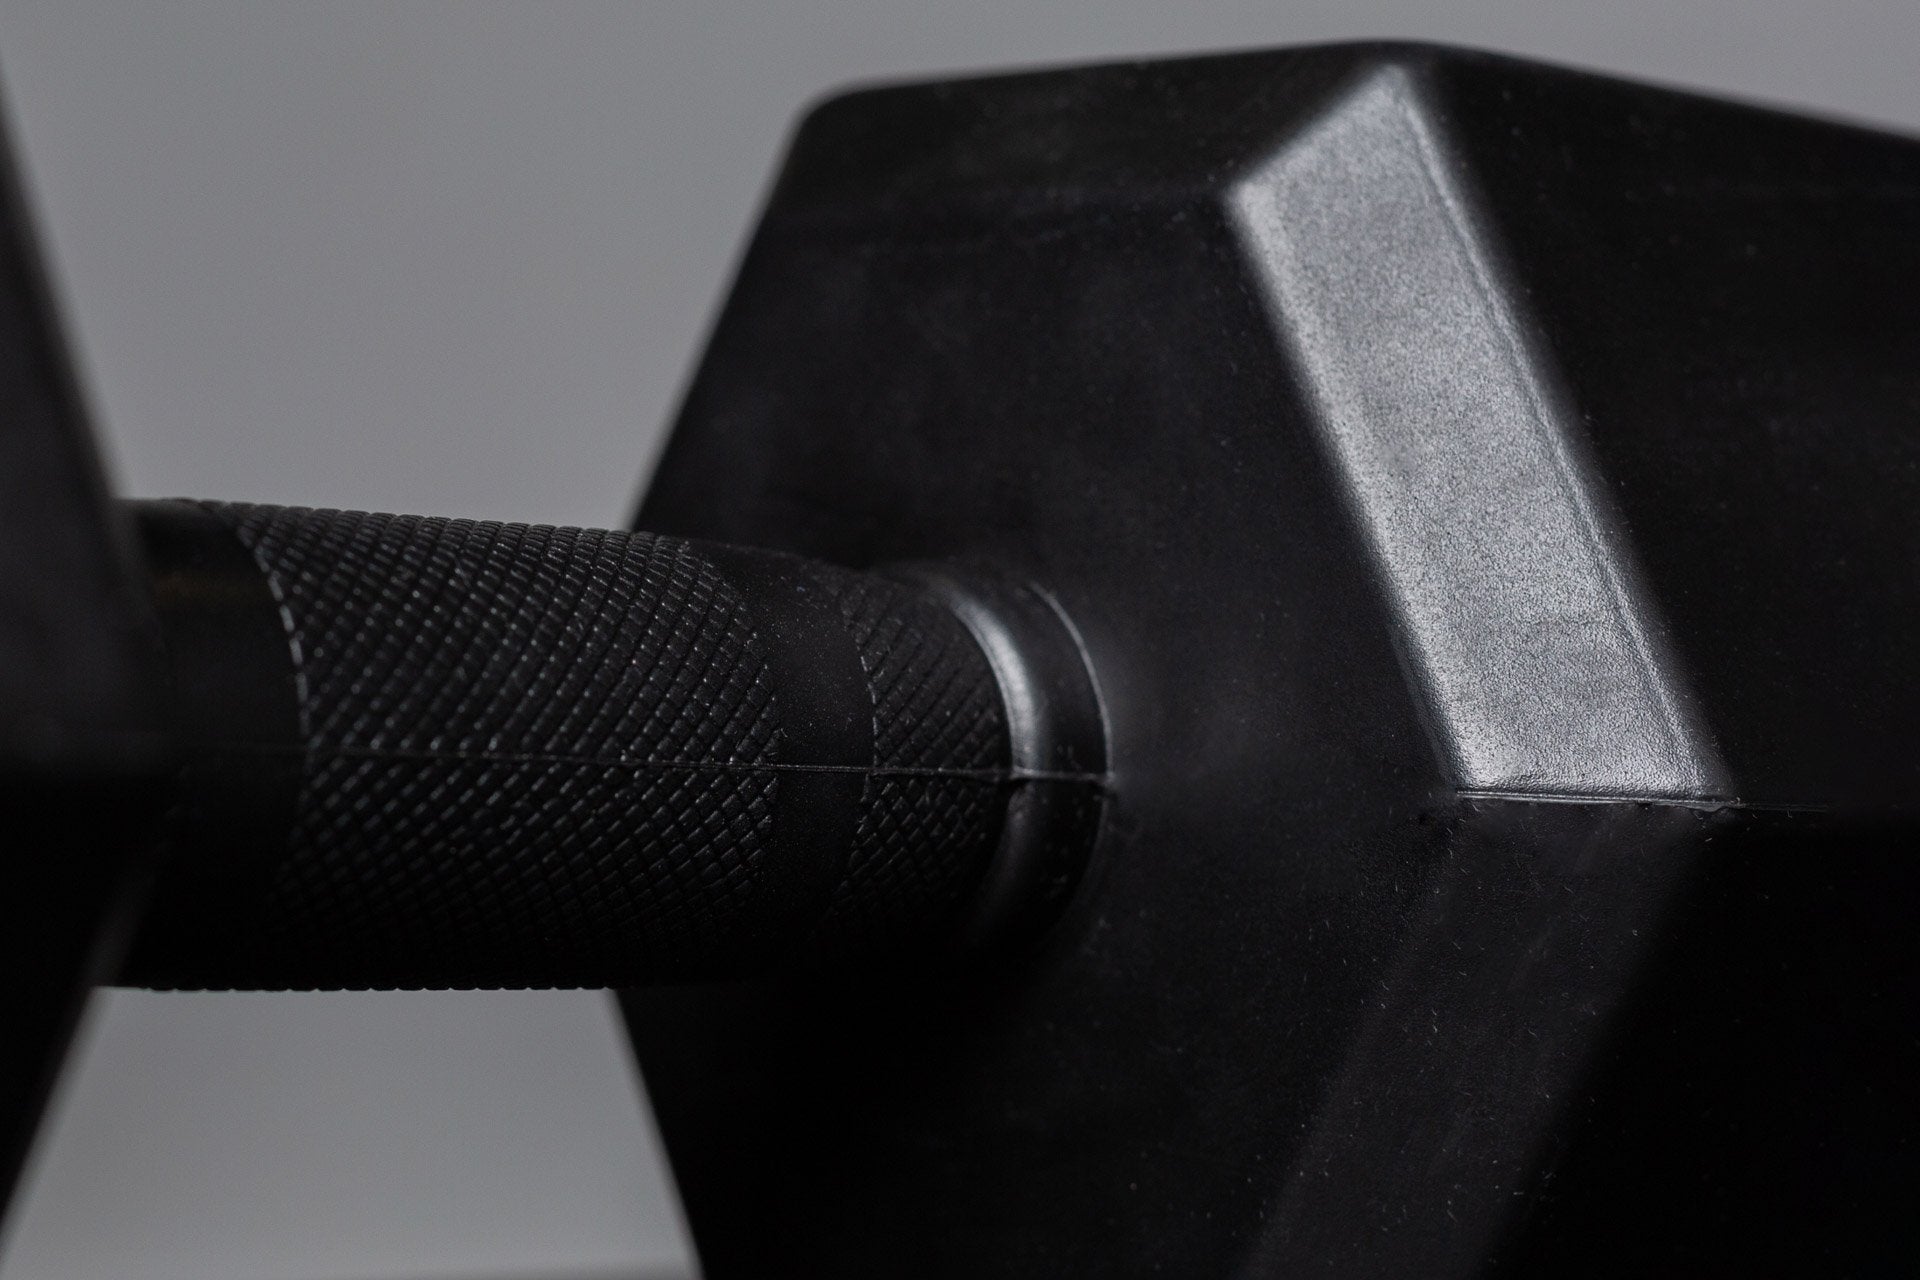 Close-up view of the center-knurled ergonomic handle of a Rubber Coated Hex Dumbbell.